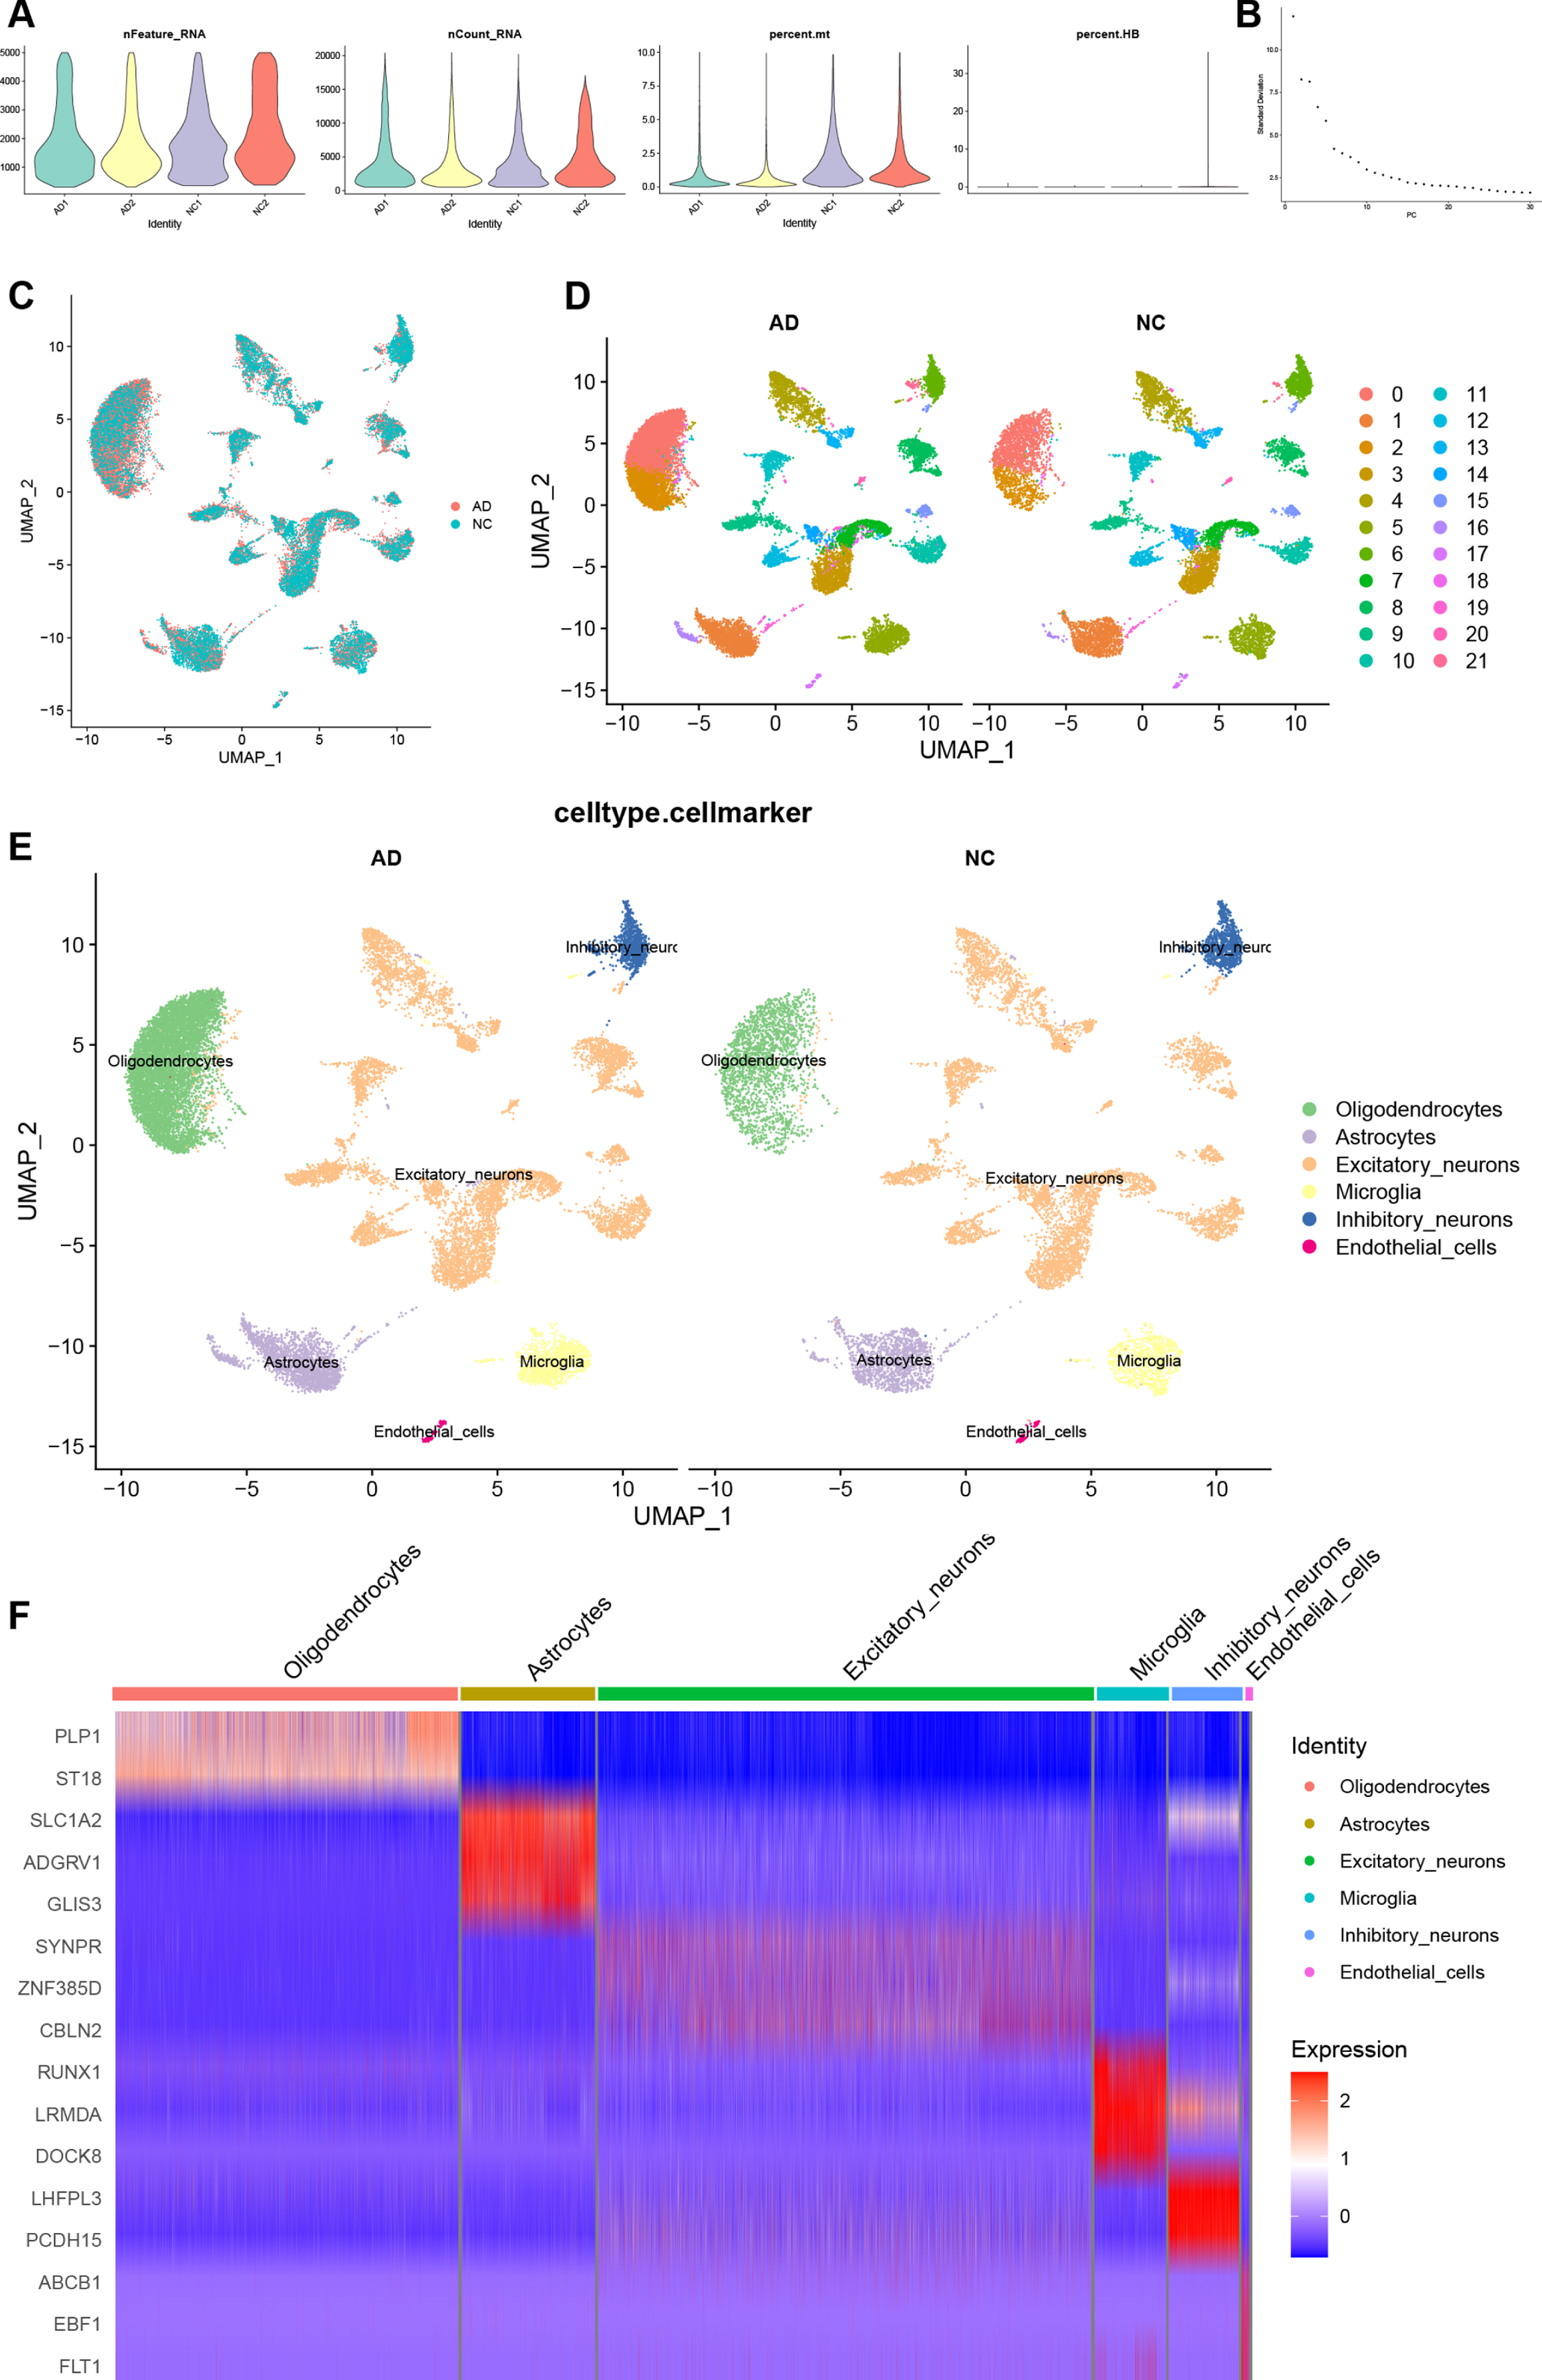 Quality control, cell clustering, and annotation of AD snRNA-seq data. A) Violin diagram shows cell characteristics after quality control. B) Elbow plot for the single cell data. The top 30 PCs were shown. C) Batch effect between AC and PA data eliminated by harmony. D) Cells in dataset was classified into 22 clusters. E) Manual annotation of cell clusters in AD with reference to previous studies. F) The heatmap shows good specificity of the cellular marker genes. AD, Alzheimer’s disease.